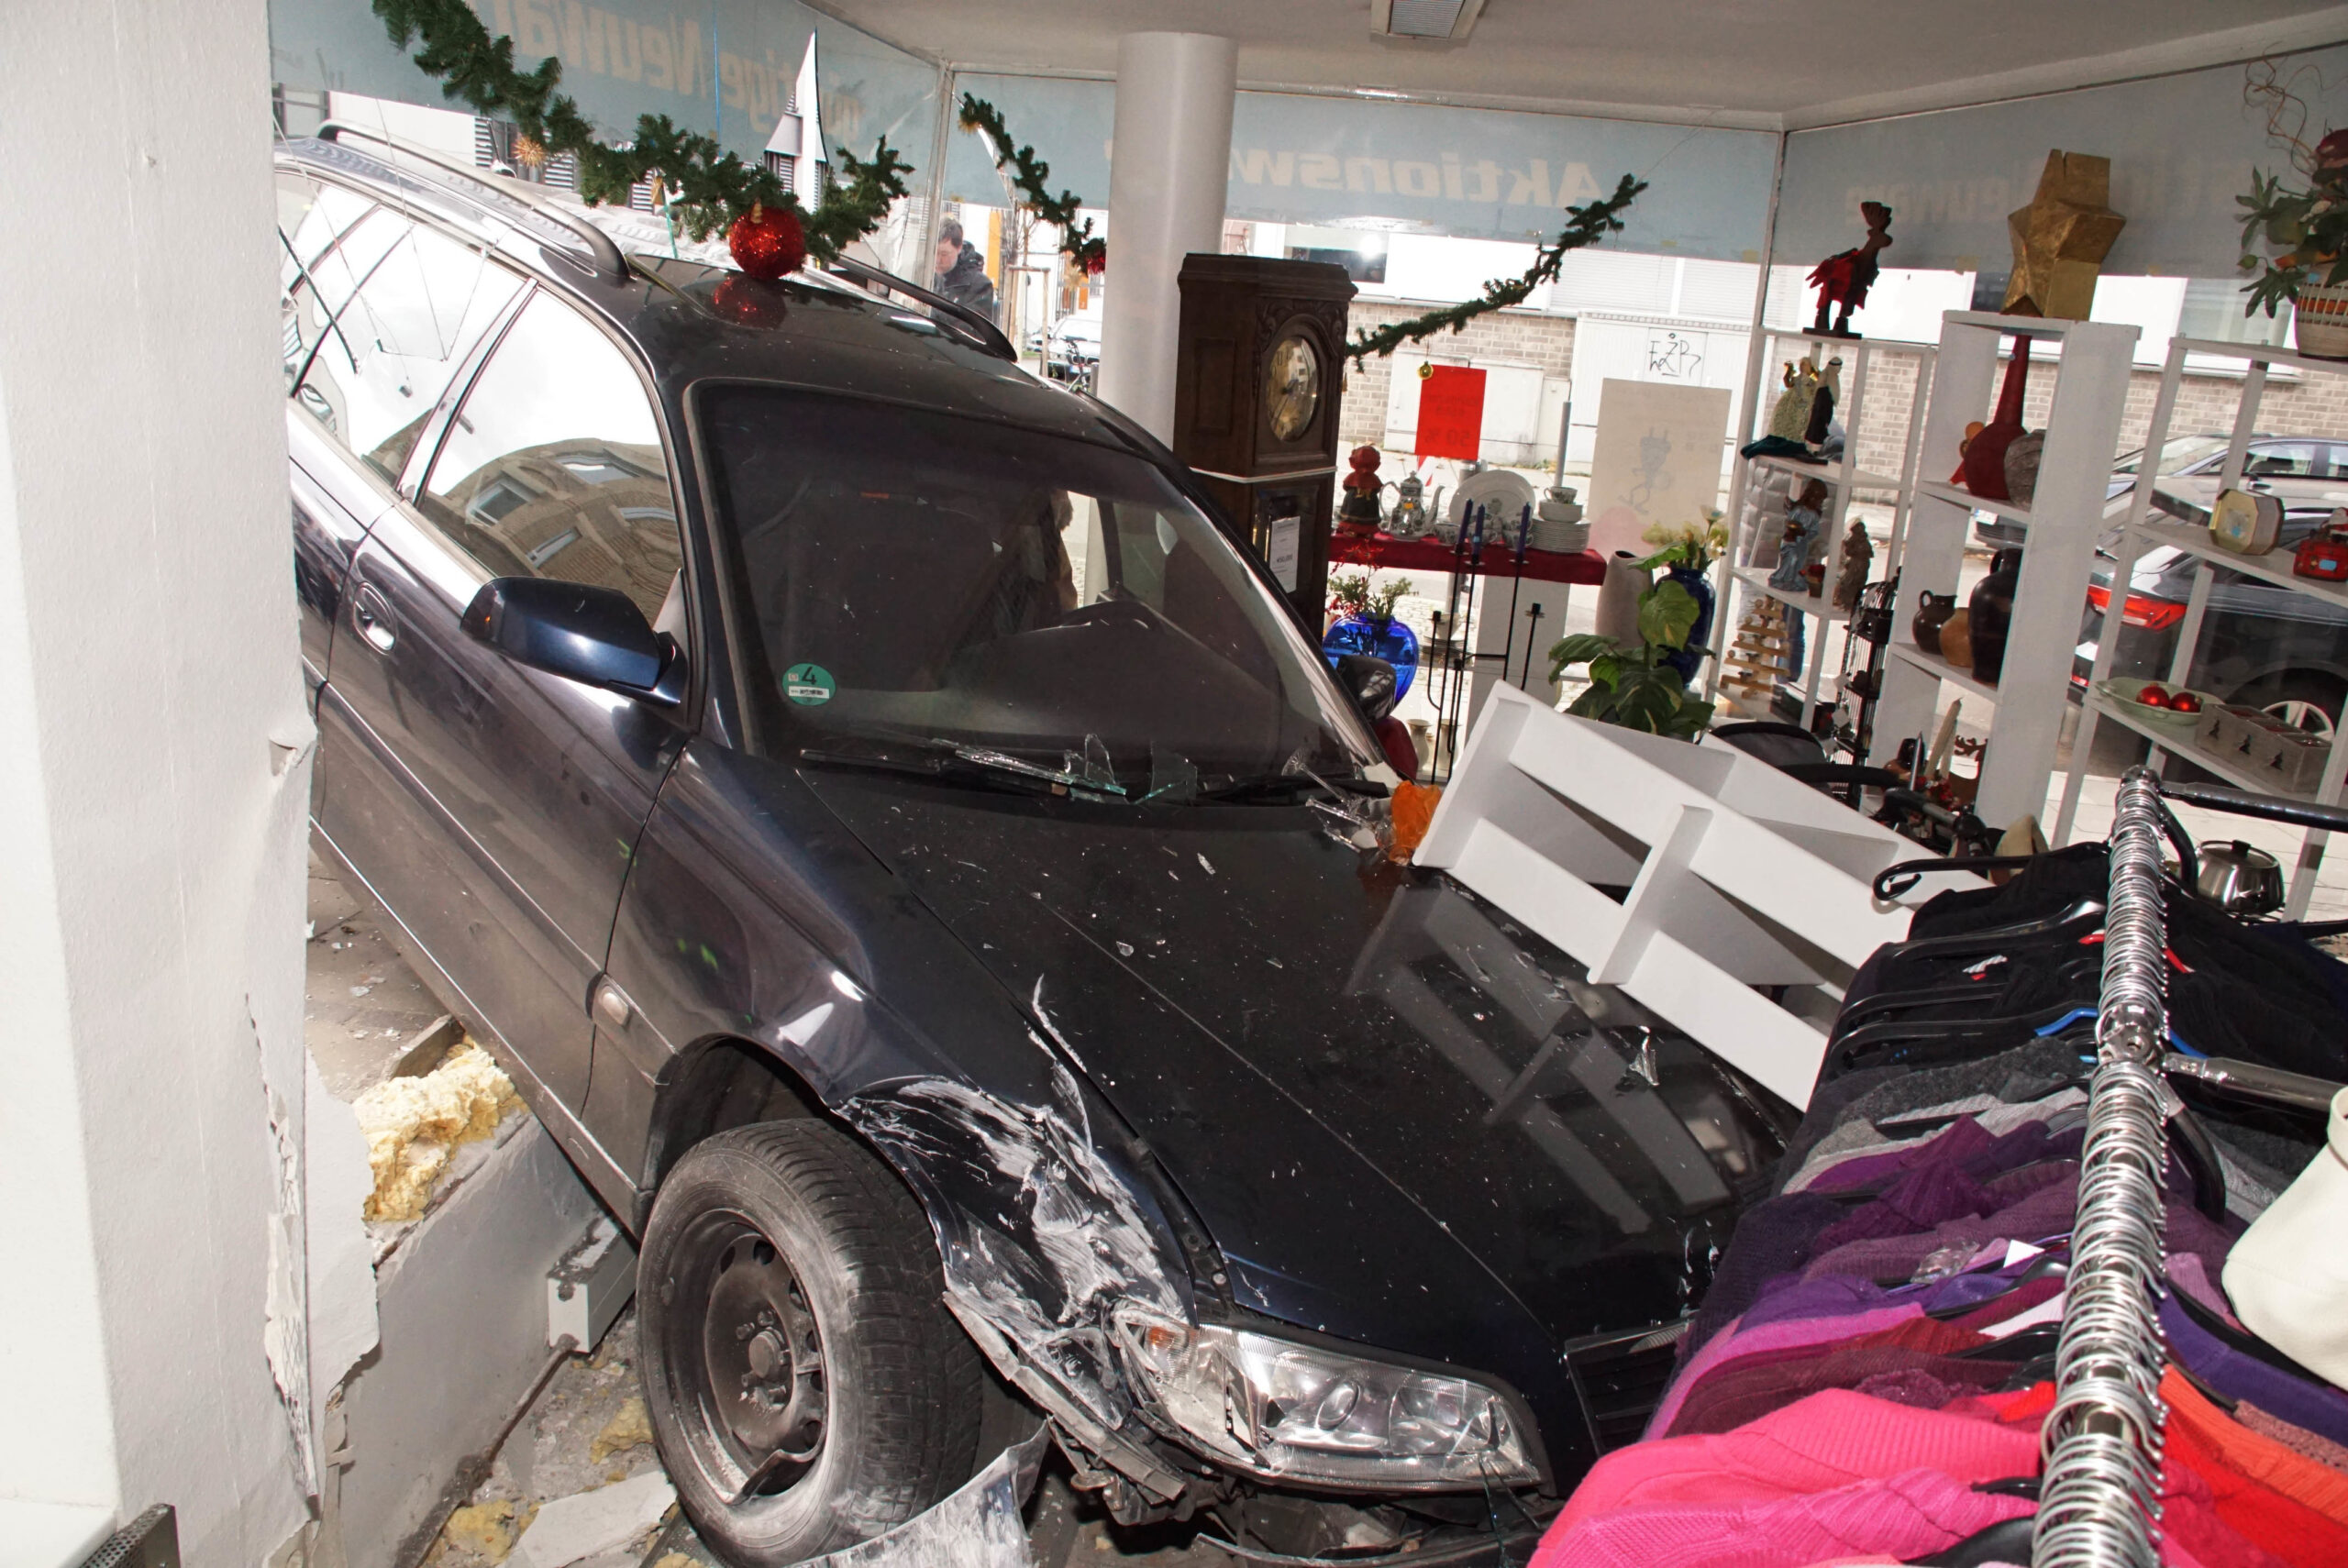 A picture taken on December 26, 2017 shows the damage after a car ploughed through the window of a store in the Bad Cannstat district of Stuttgart.
The driver has lost the control of the vehicle for unknown reasons.  / AFP PHOTO / dpa / Andreas Rosar / Germany OUT        (Photo credit should read ANDREAS ROSAR/DPA/AFP via Getty Images)